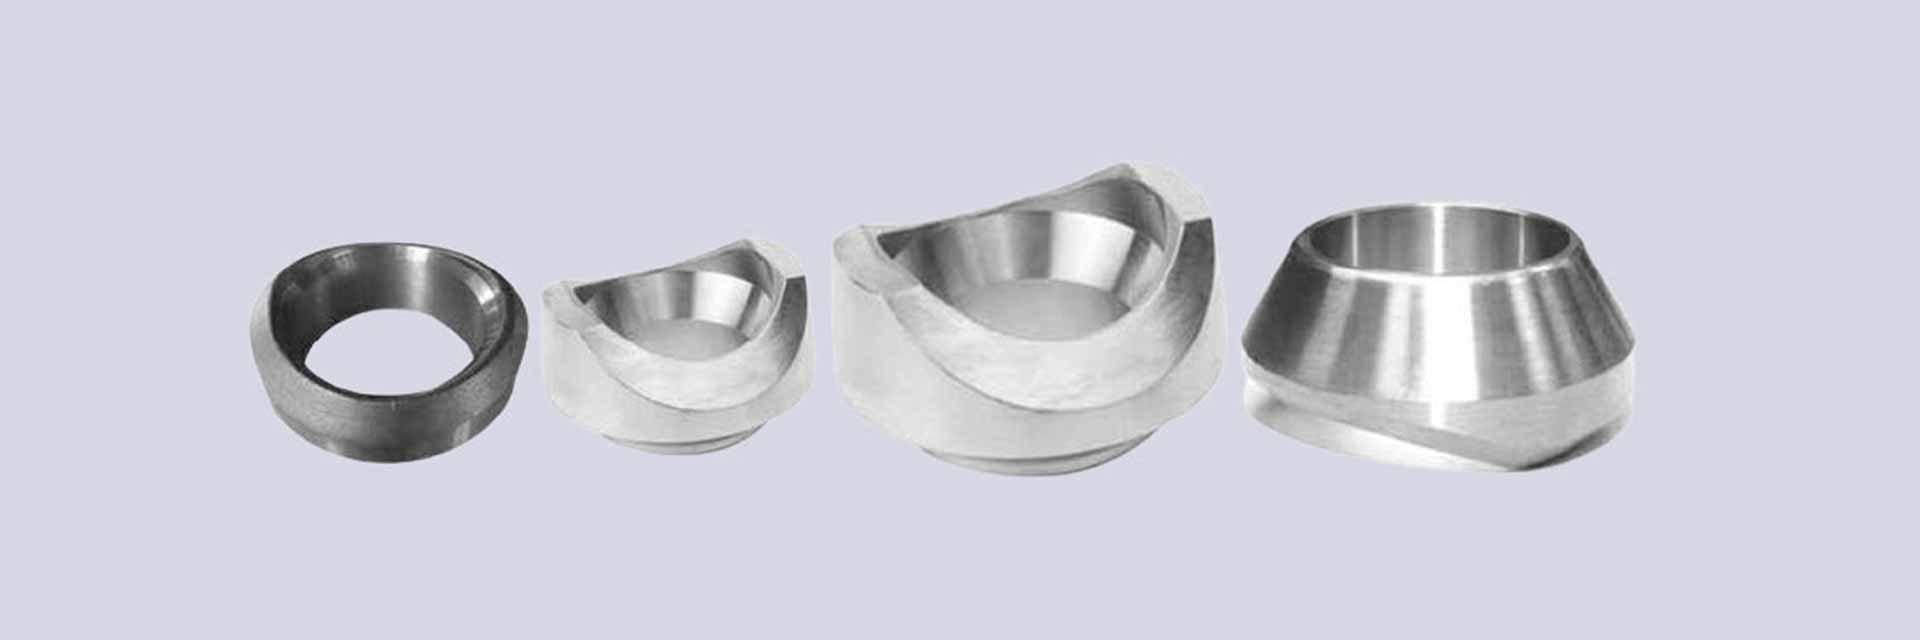 Ti 6242 Ti-6Al-2Sn-4Zr-2Mo forged ring for industry ASTM B381 Manufacturer,Ti  6242 Ti-6Al-2Sn-4Zr-2Mo forged ring for industry ASTM B381 Supplier,Exporter,  China